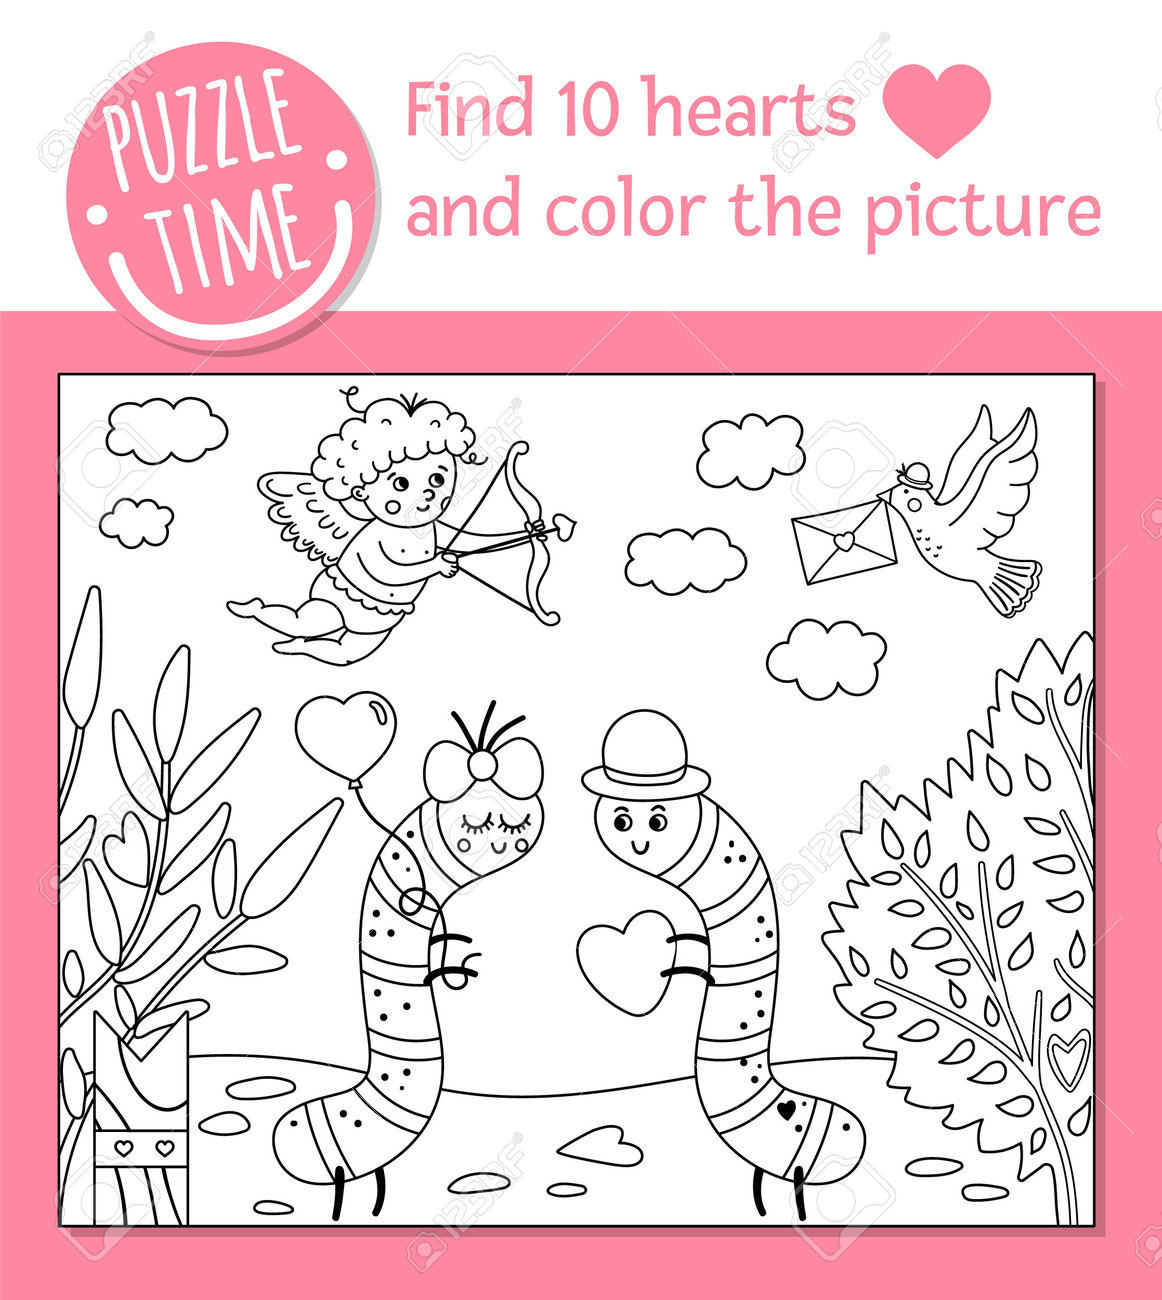 Saint valentine day coloring page for children funny scene with caterpillars in the garden cupid vector holiday outline illustration with cute insects color book with colored example royalty free svg cliparts vectors